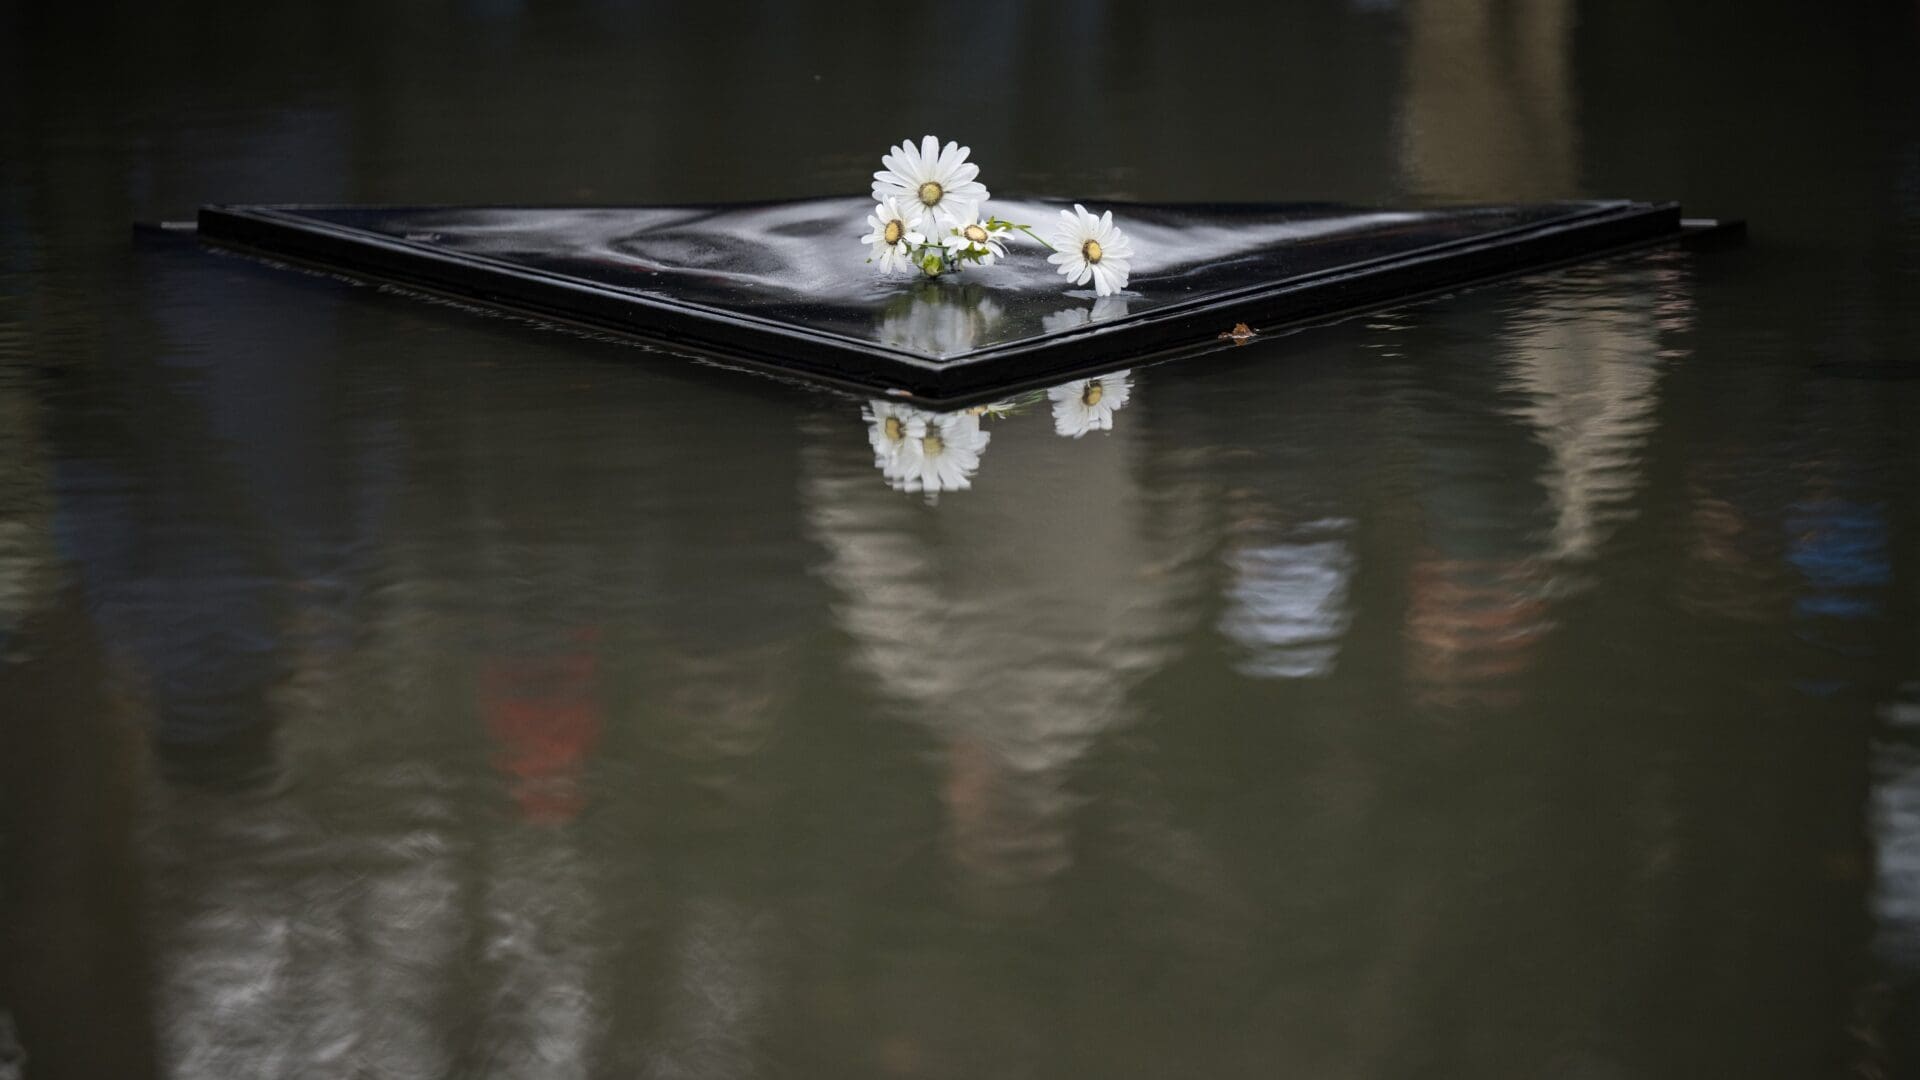 Flowers laid on the triangular stone at the centre of a memorial pool of the Memorial to the Sinti and Roma Victims of National Socialism at the Tiergarten in Berlin on 27 January 2023.